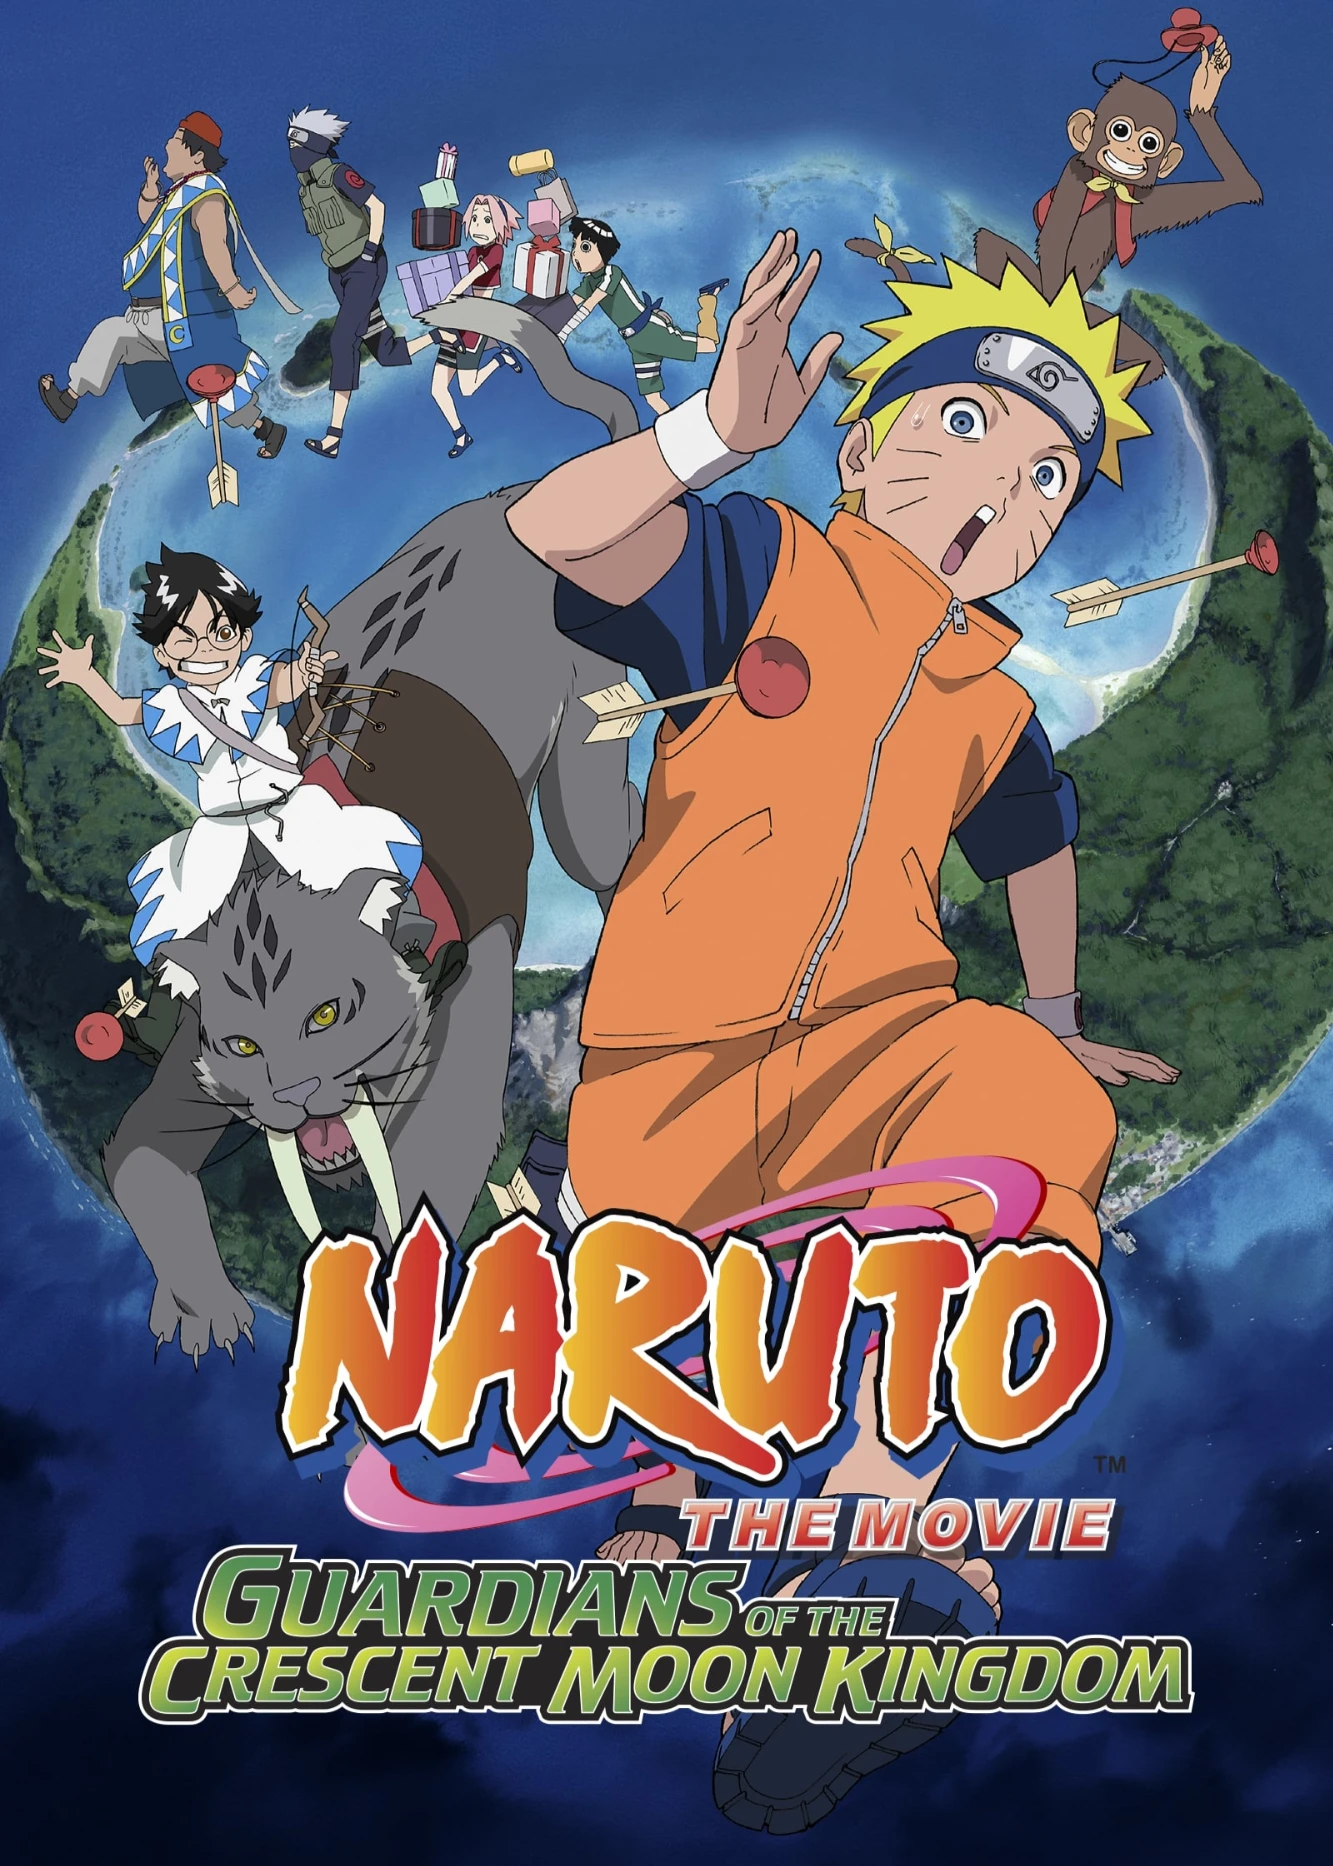 Naruto the Movie 3: Guardians of the Crescent Moon Kingdom | Naruto the Movie 3: Guardians of the Crescent Moon Kingdom (2006)